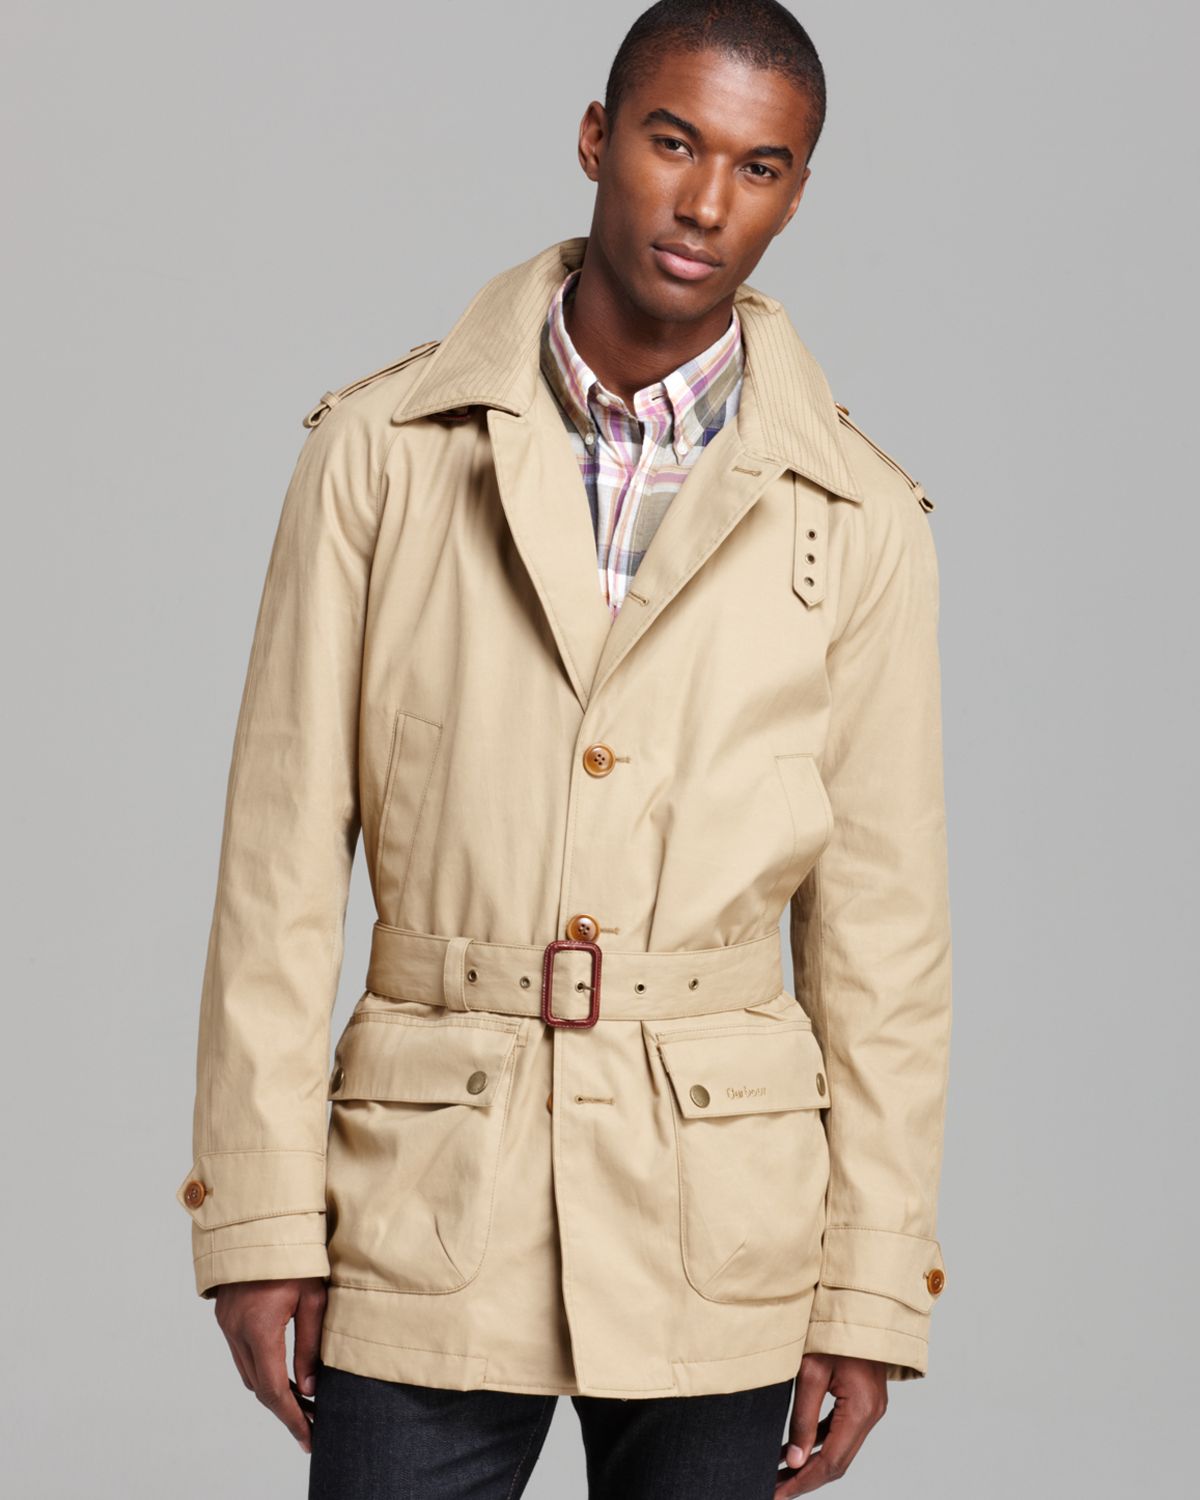 Lyst - Barbour Cromarty Short Trench in Natural for Men